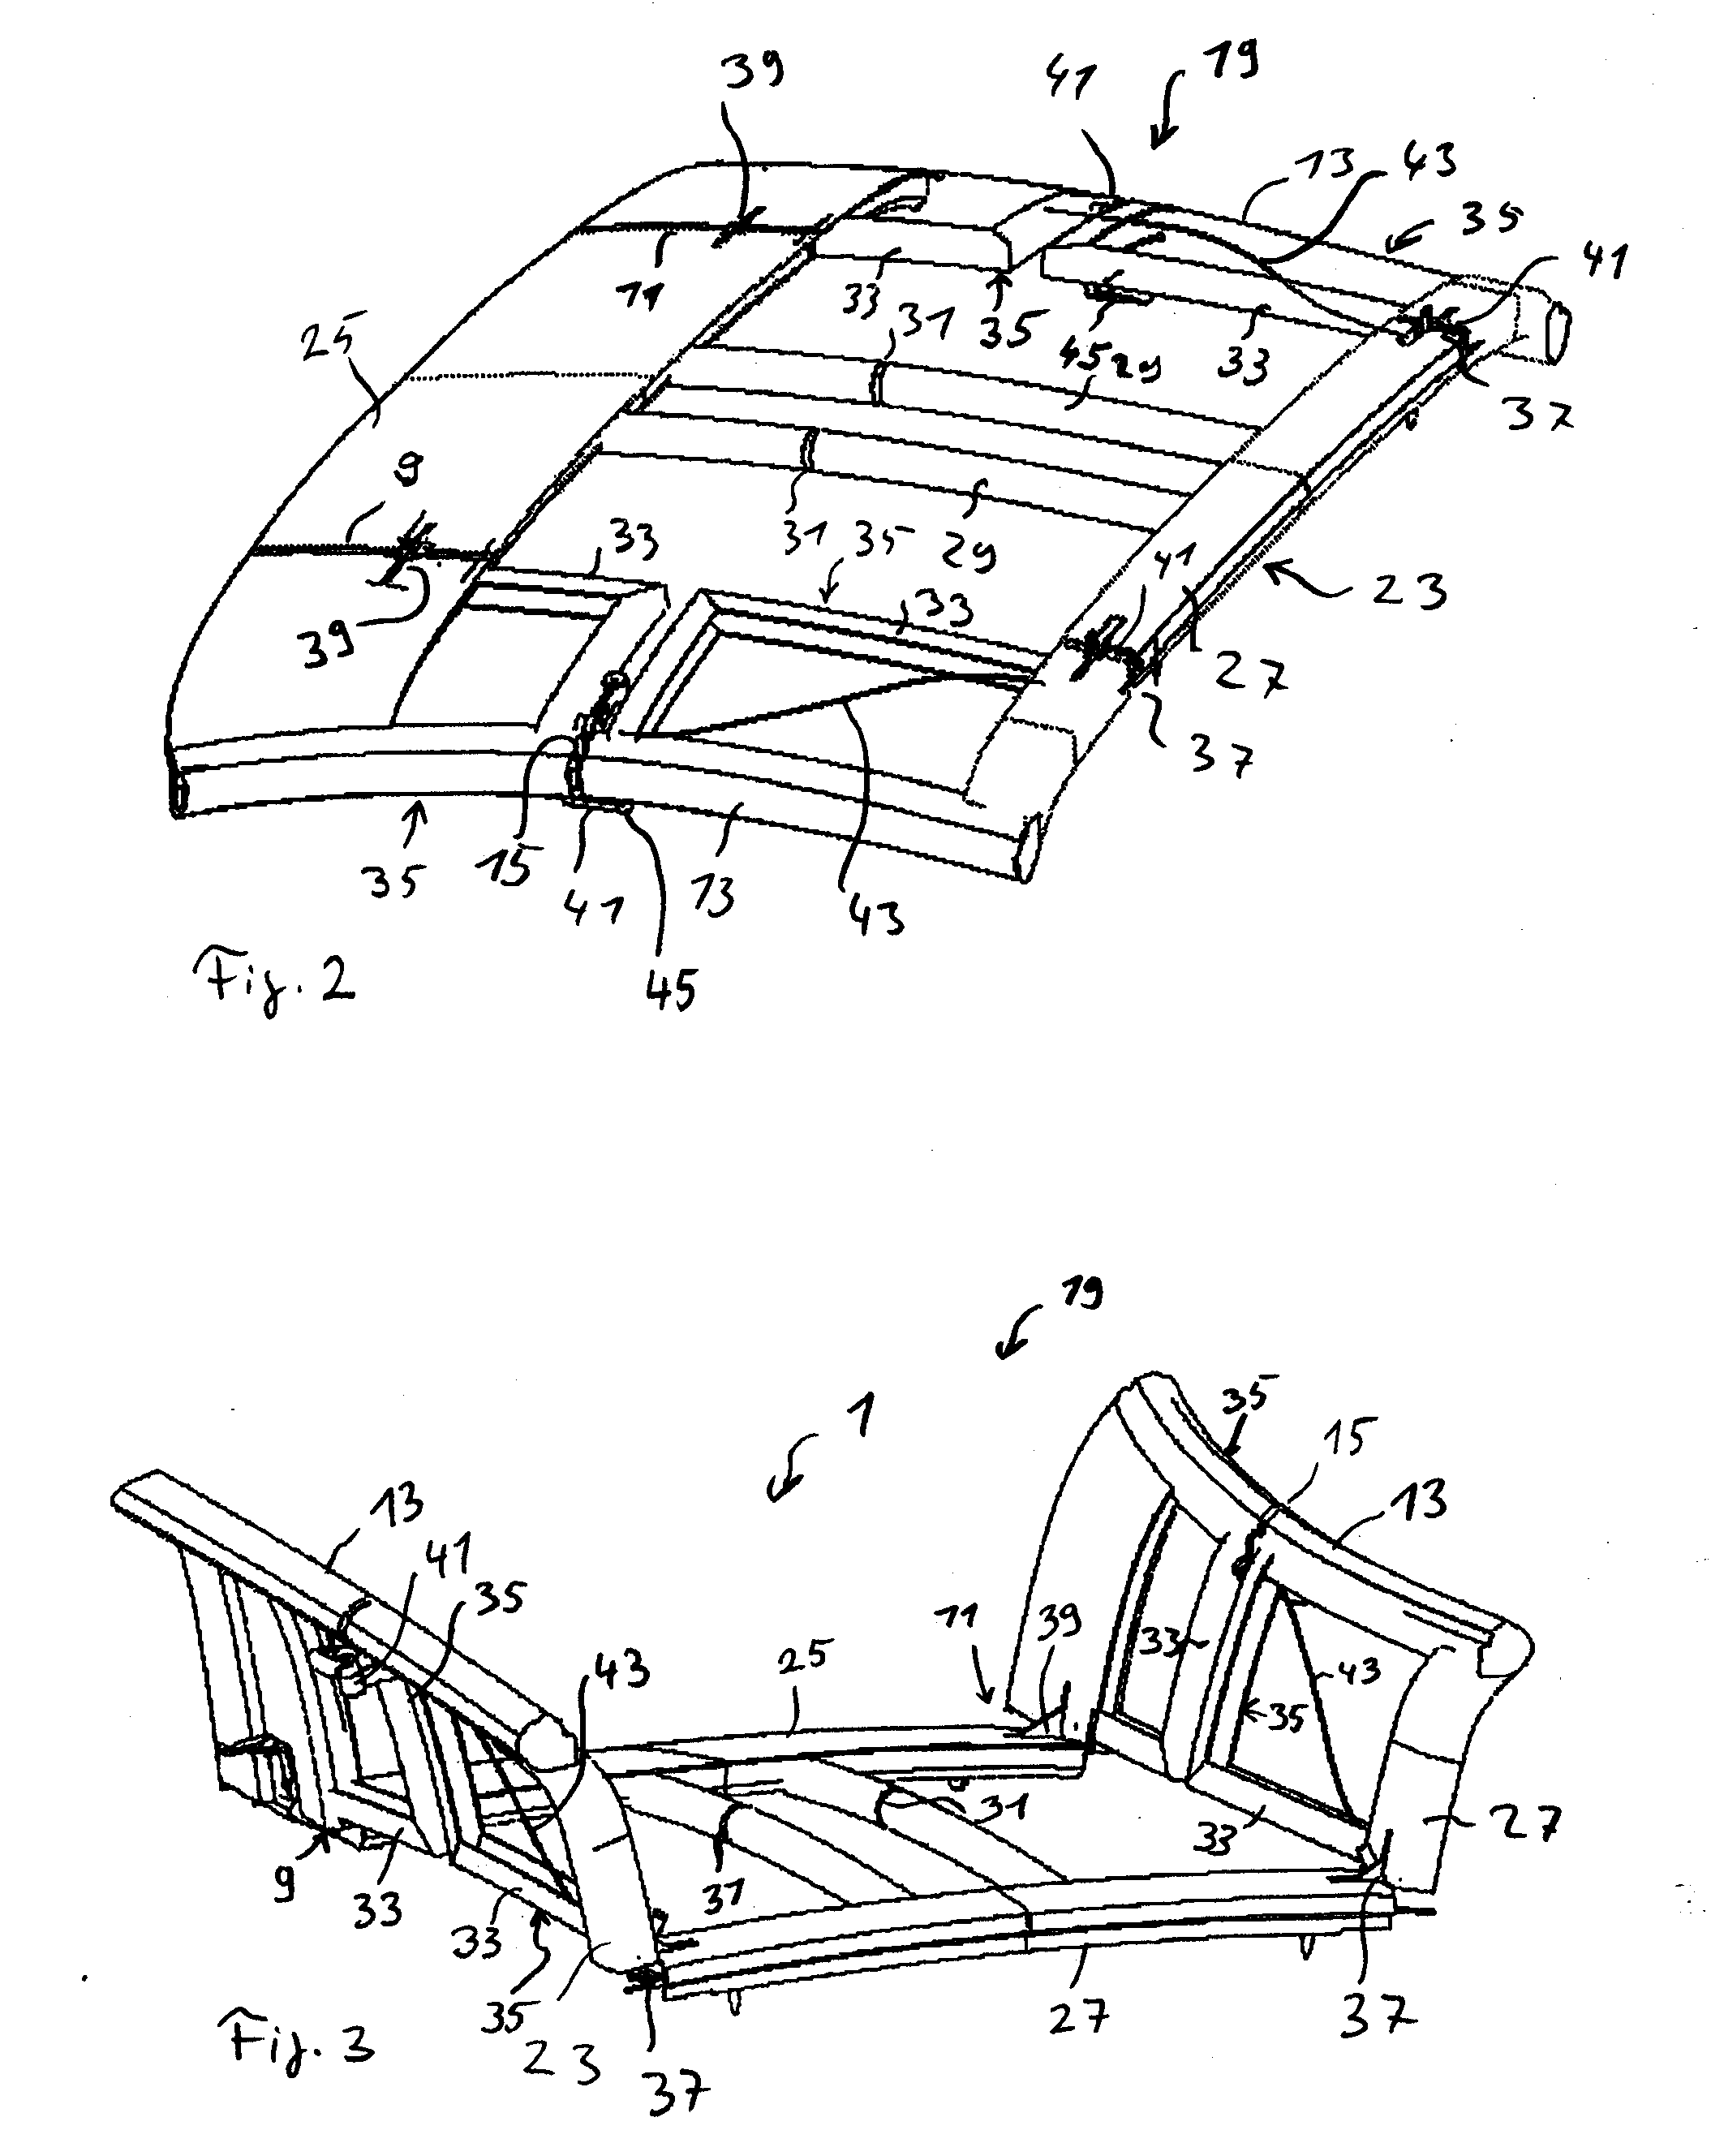 Compact storable soft-top for a motor vehicle